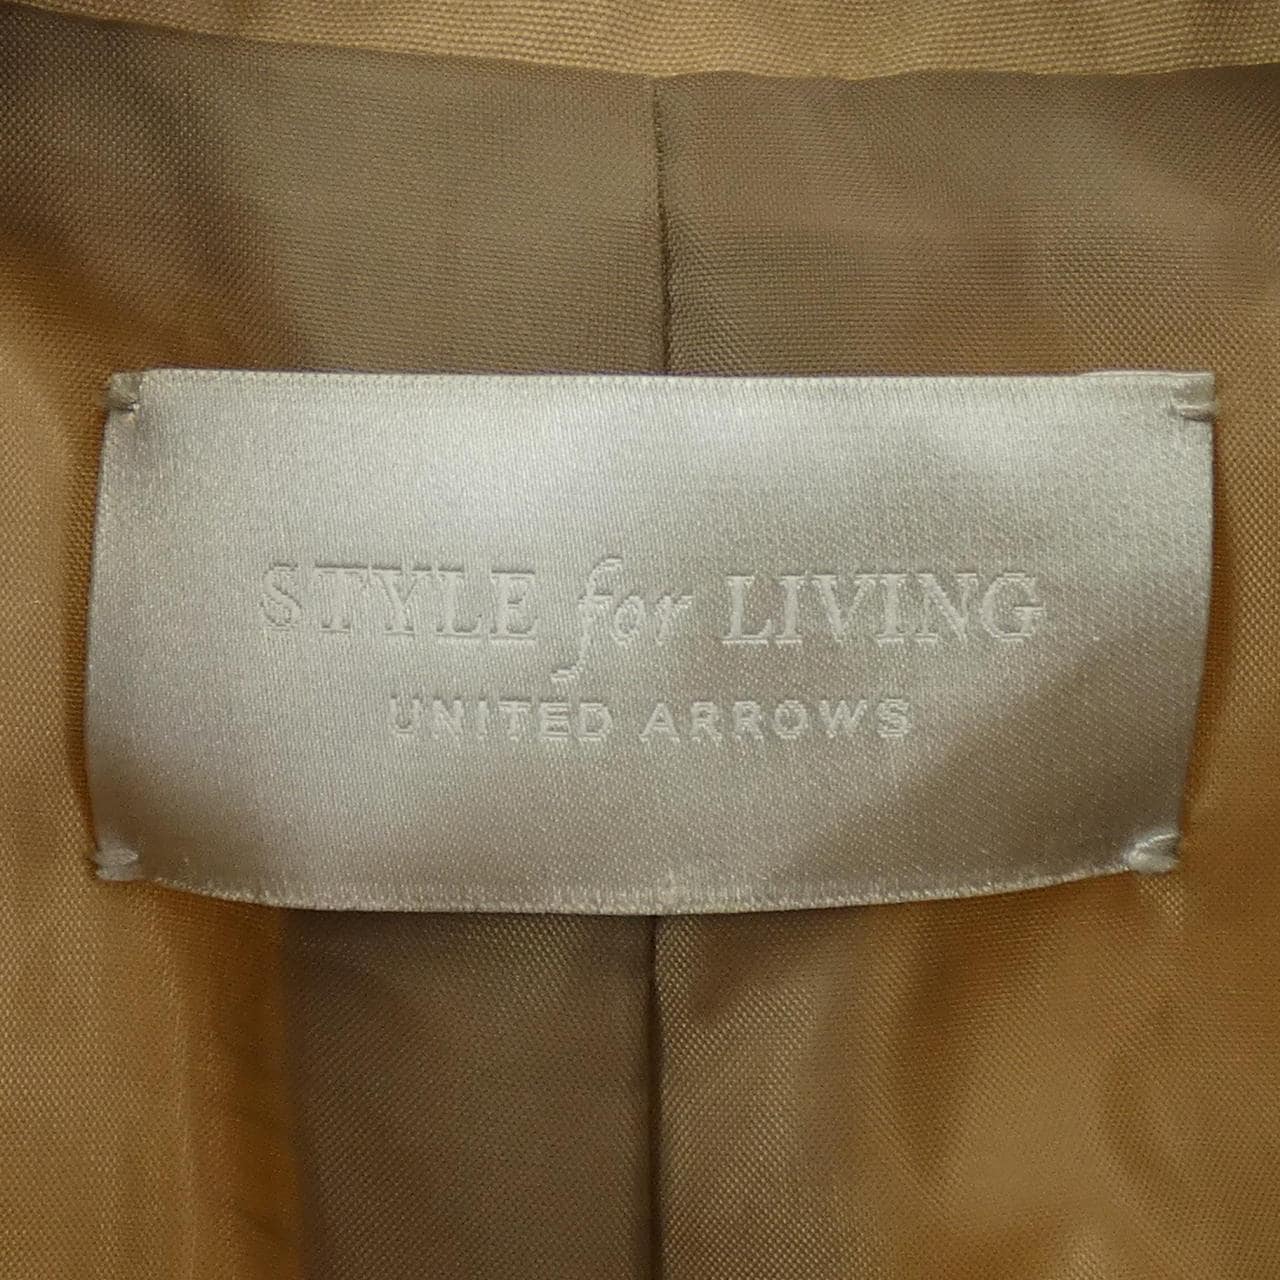 STYLE for LIVING coat